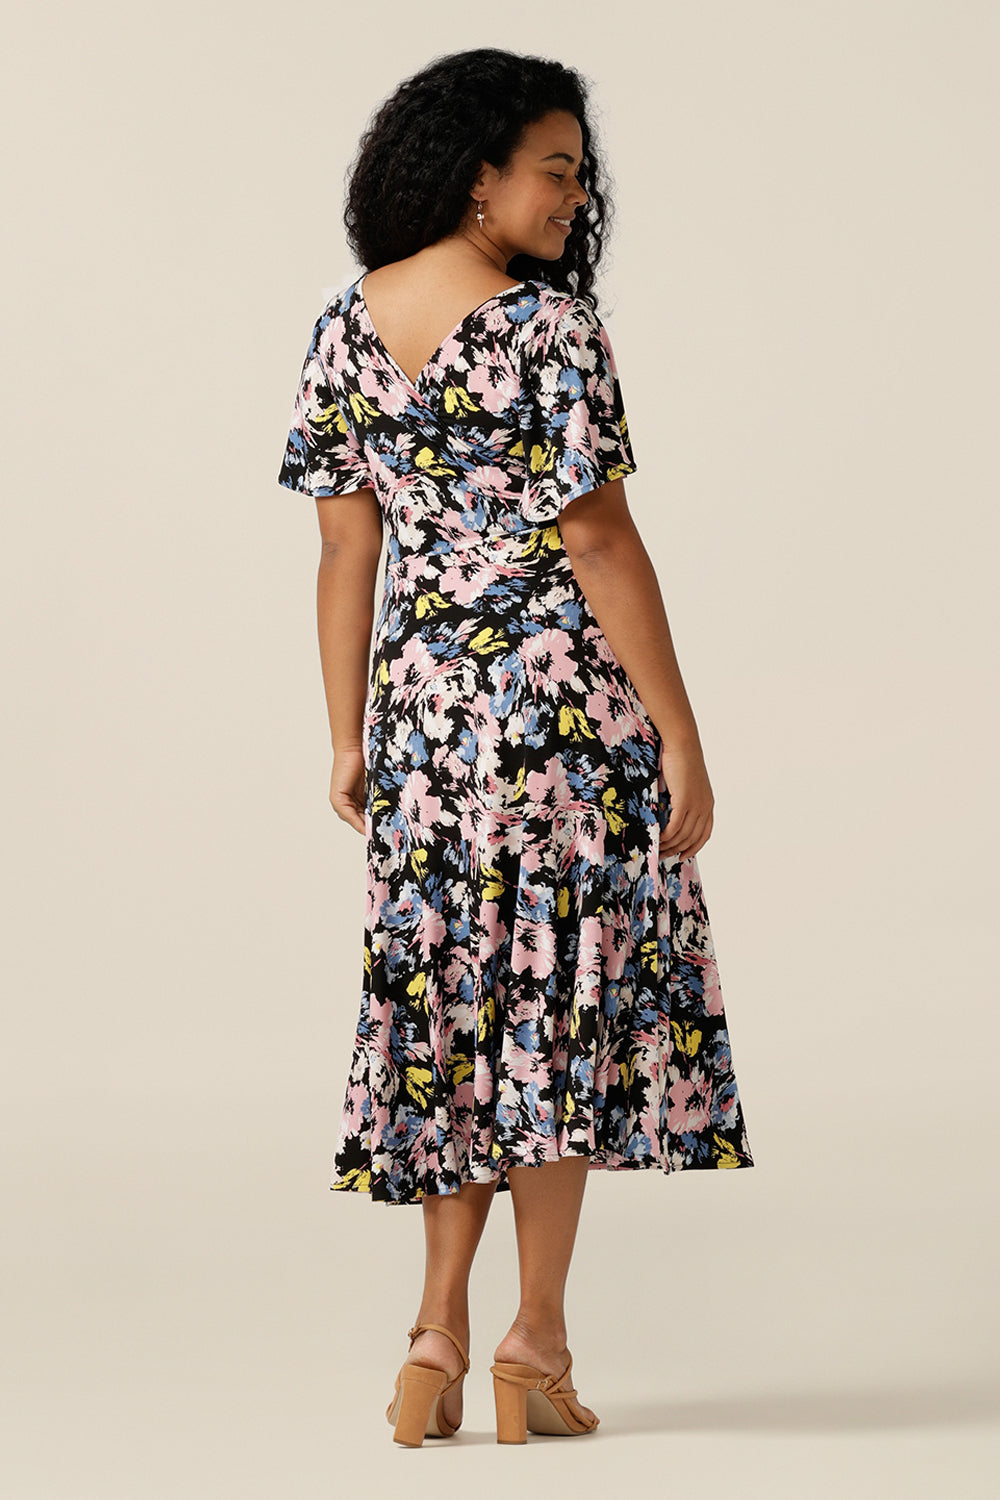 Vintage floral print dresses for women over 40, the Nicolle Reversible Dress is shown here on a size 12 curvy woman. A reversible style dress, she is worn here as wrap front with V-neckline but can worn with a boat neckline. A dress with arm coverage, it has short sleeves and a full midi-length skirt. A dress for feminine corporate dressing and work attire, this dress comes in sizes 8 to sizes 24.